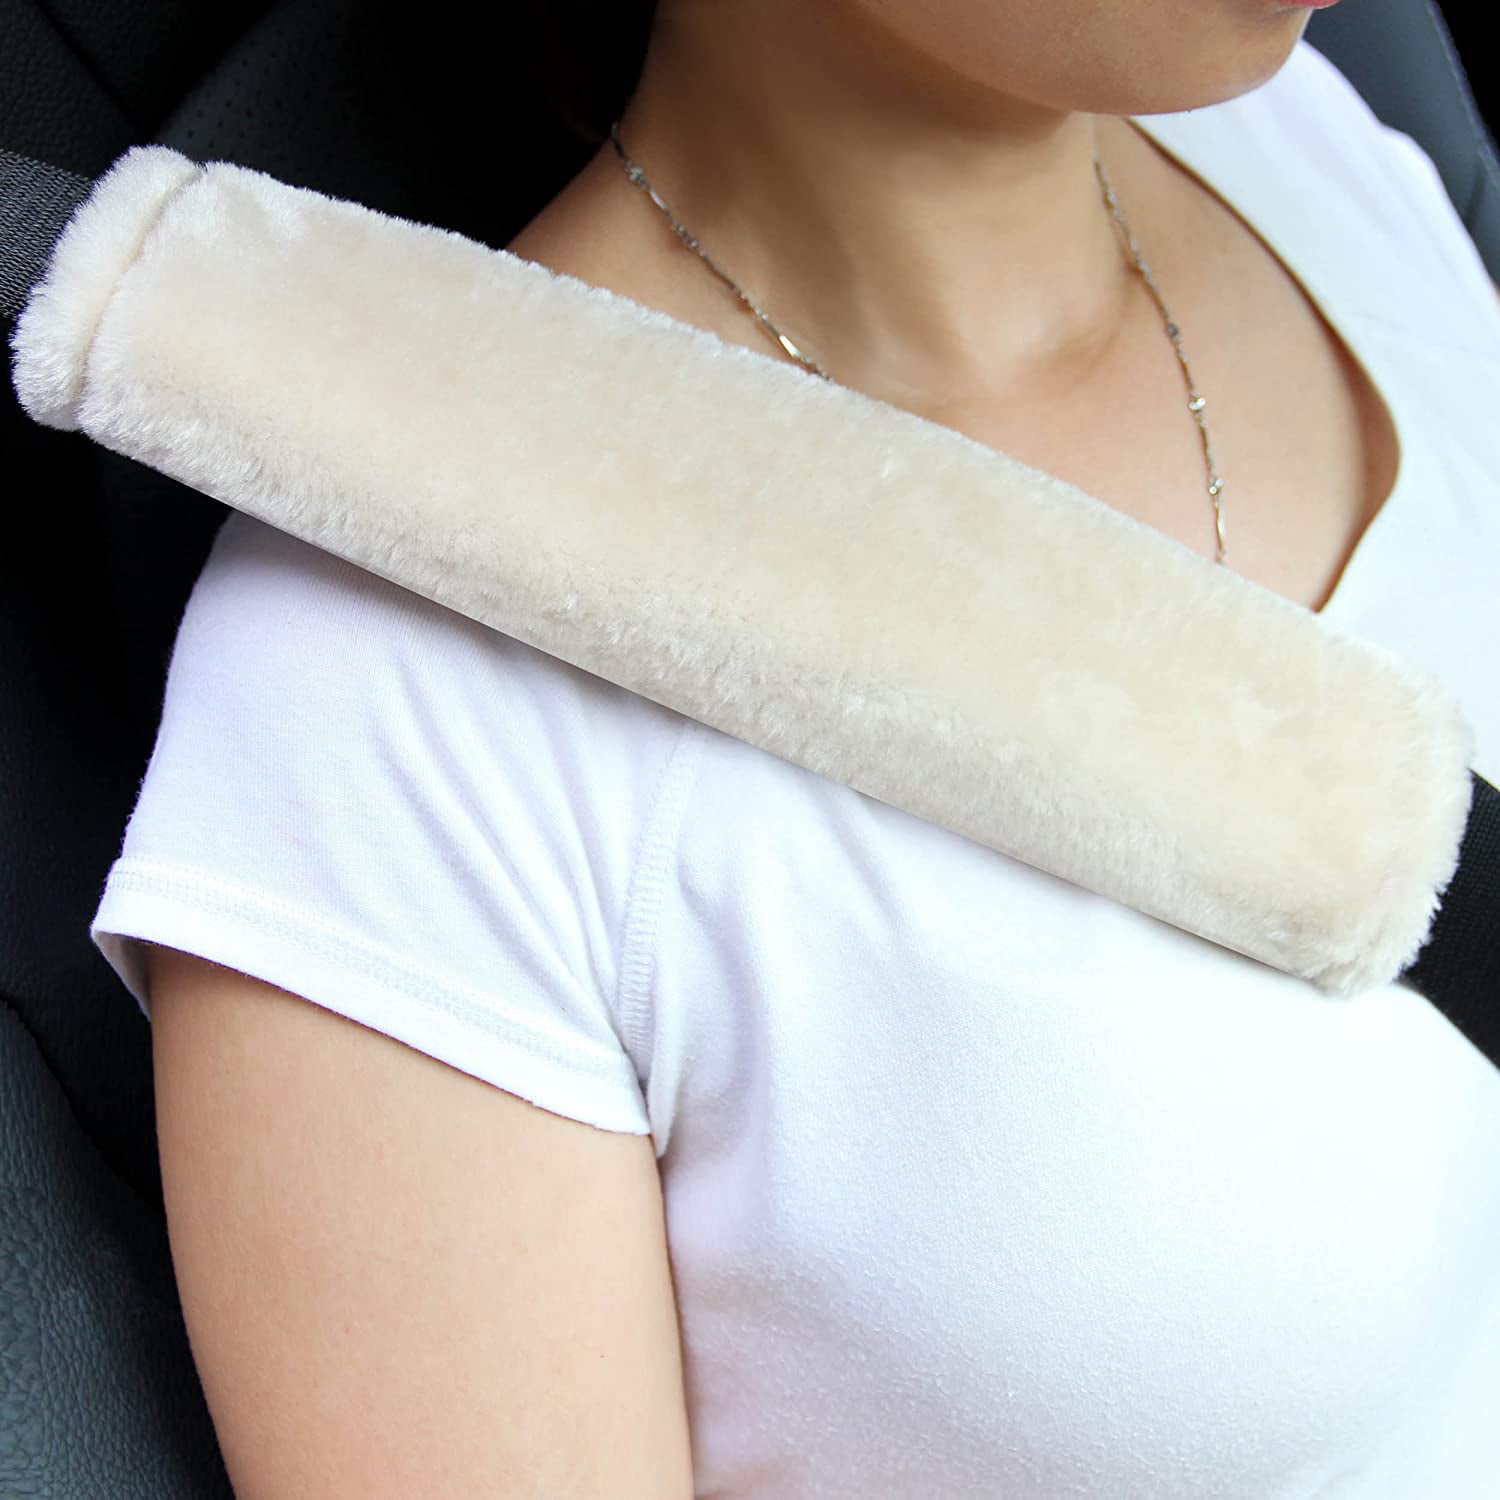 GetUSCart- Soft Faux Sheepskin Seat Belt Shoulder Pad for a More  Comfortable Driving, Compatible with Adults Youth Kids - Car, Truck, SUV,  Airplane,Carmera Backpack Straps 2 Packs Light Gray